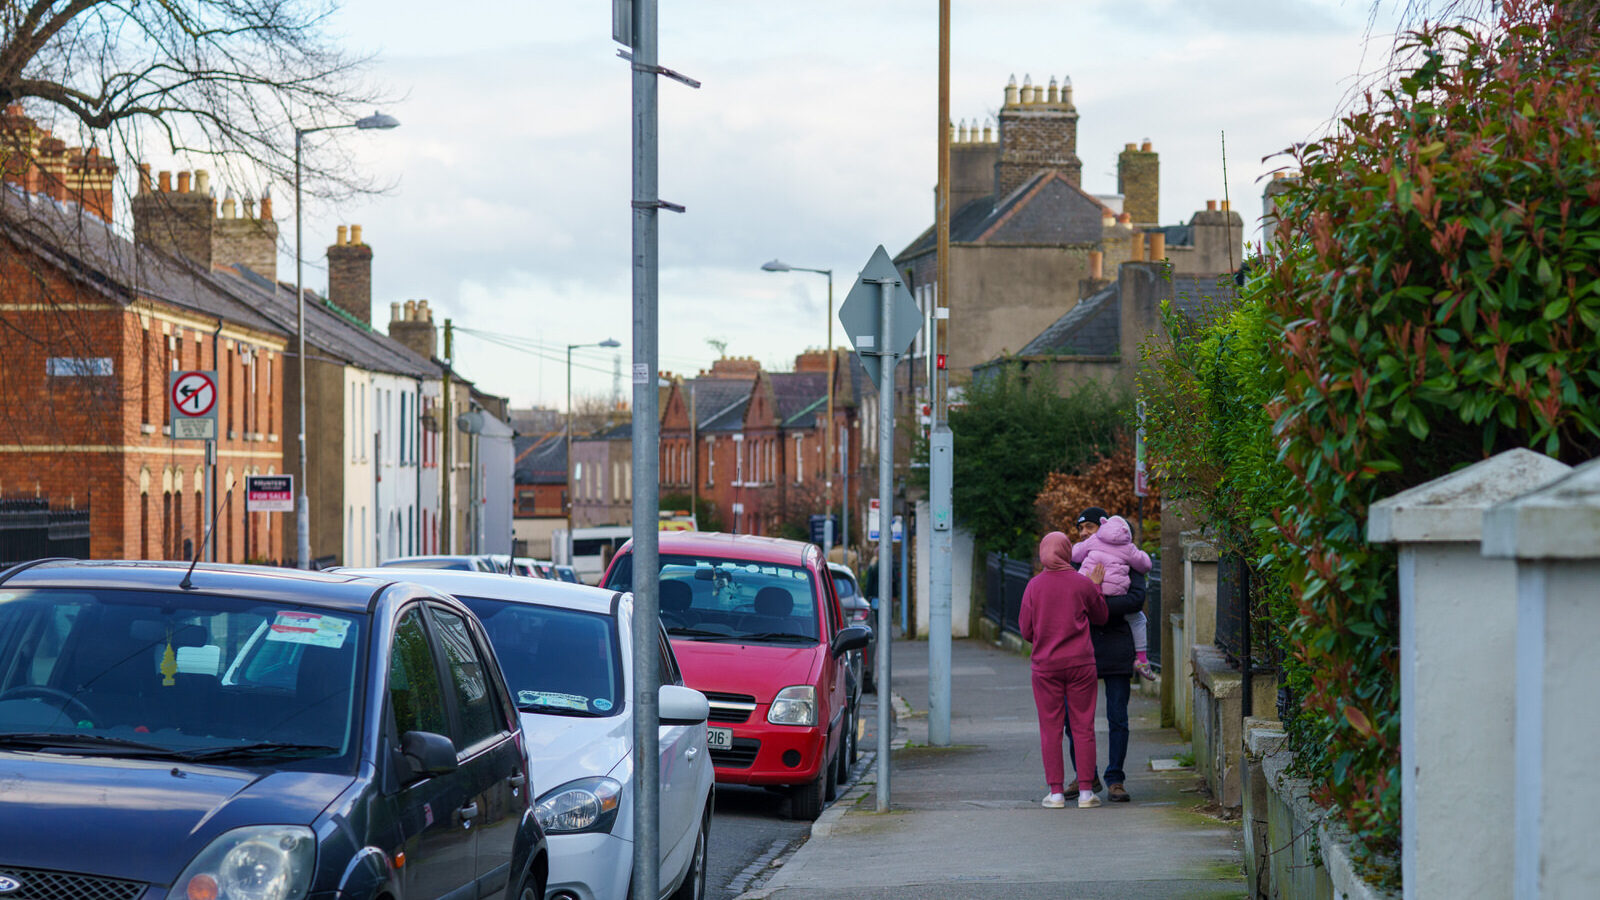 EXPLORING AUGHRIM STREET IN THE STONEYBATTER AREA OF DUBLIN [AND AUGHRIM LANE]-228659-1